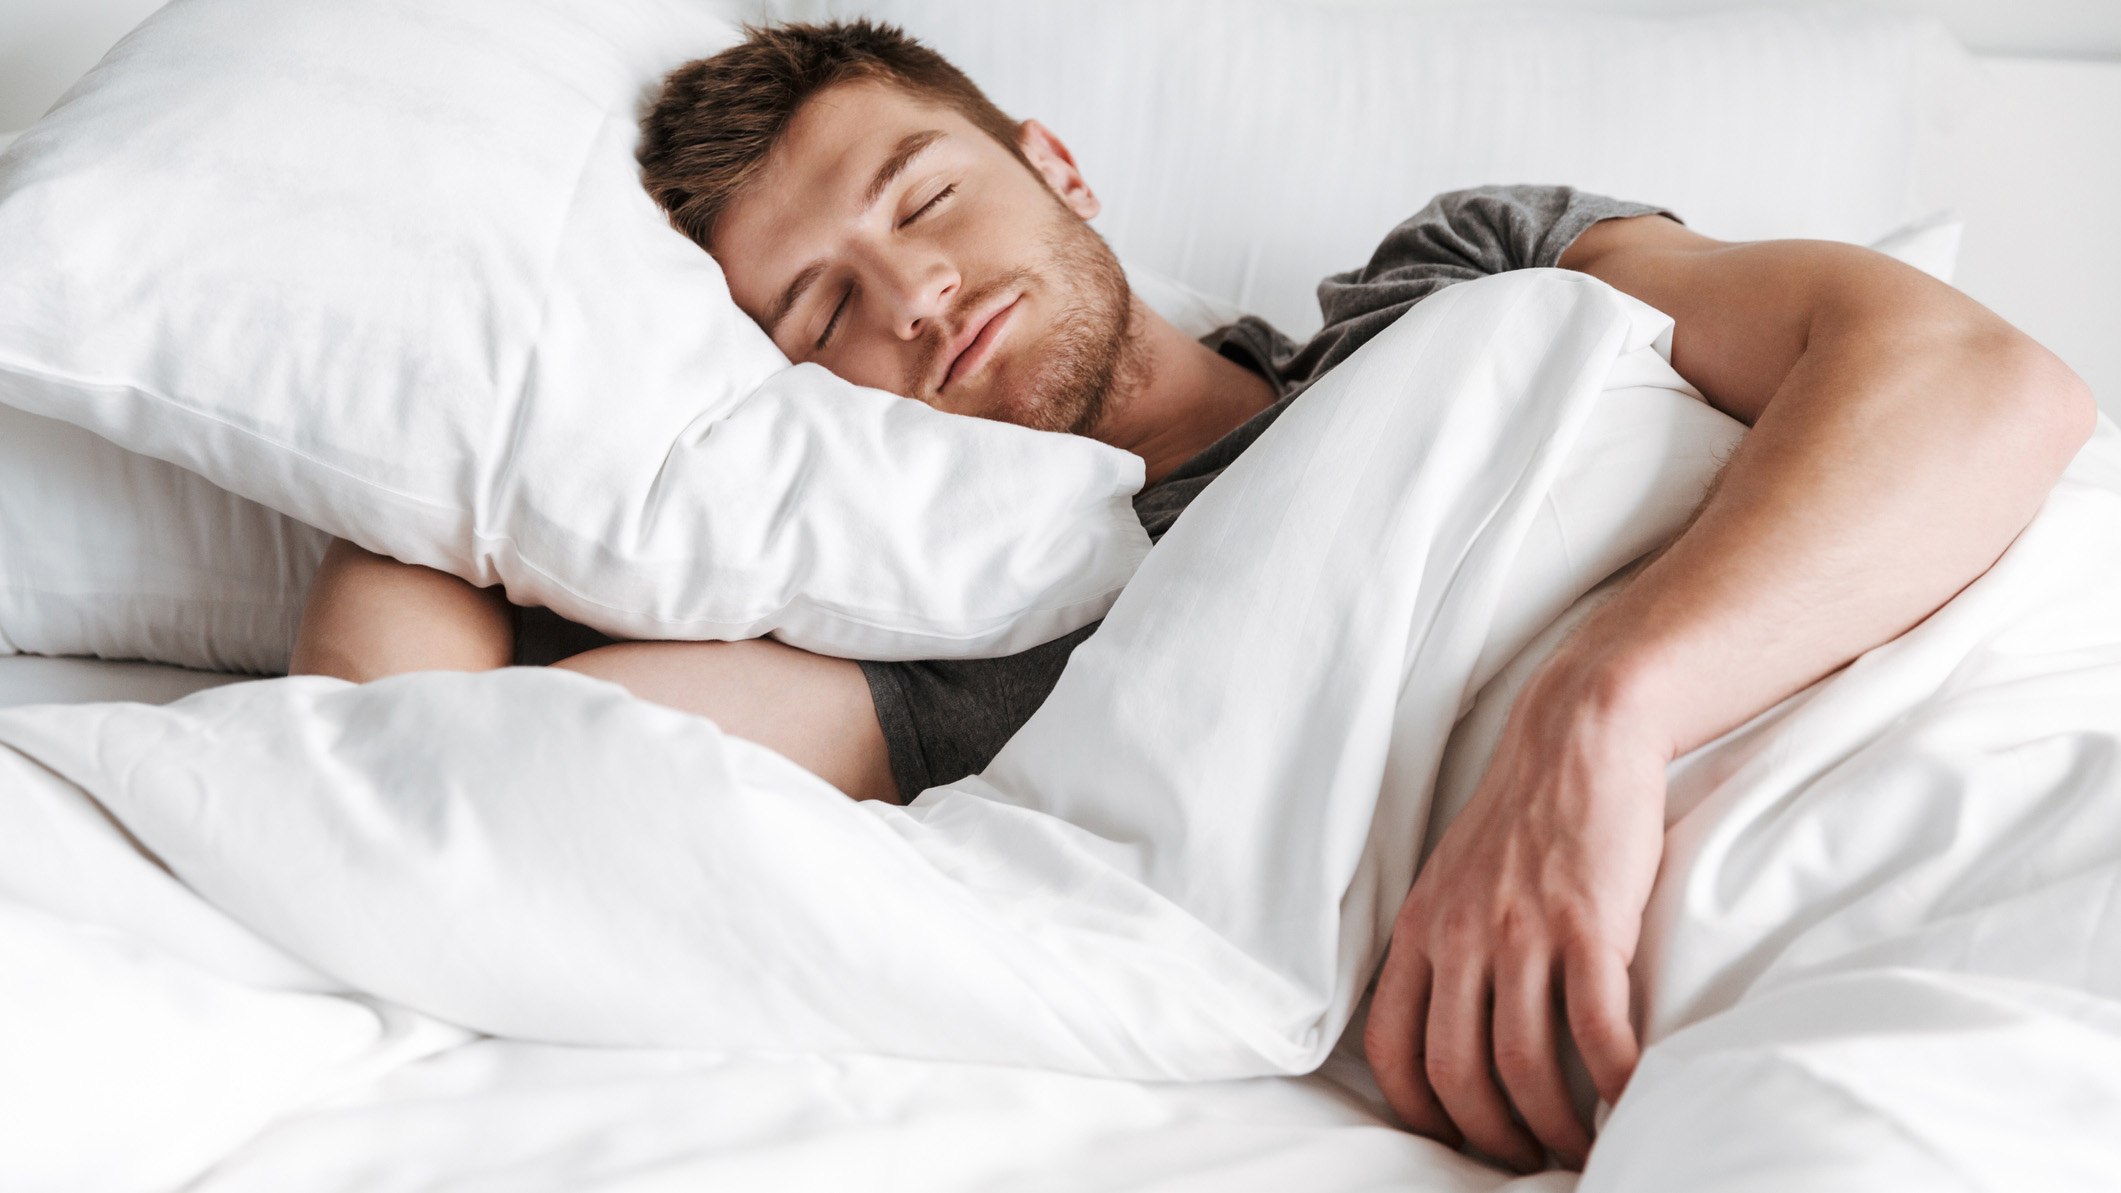 A dark-haired man is sleeping on his side, covered with a white duvet